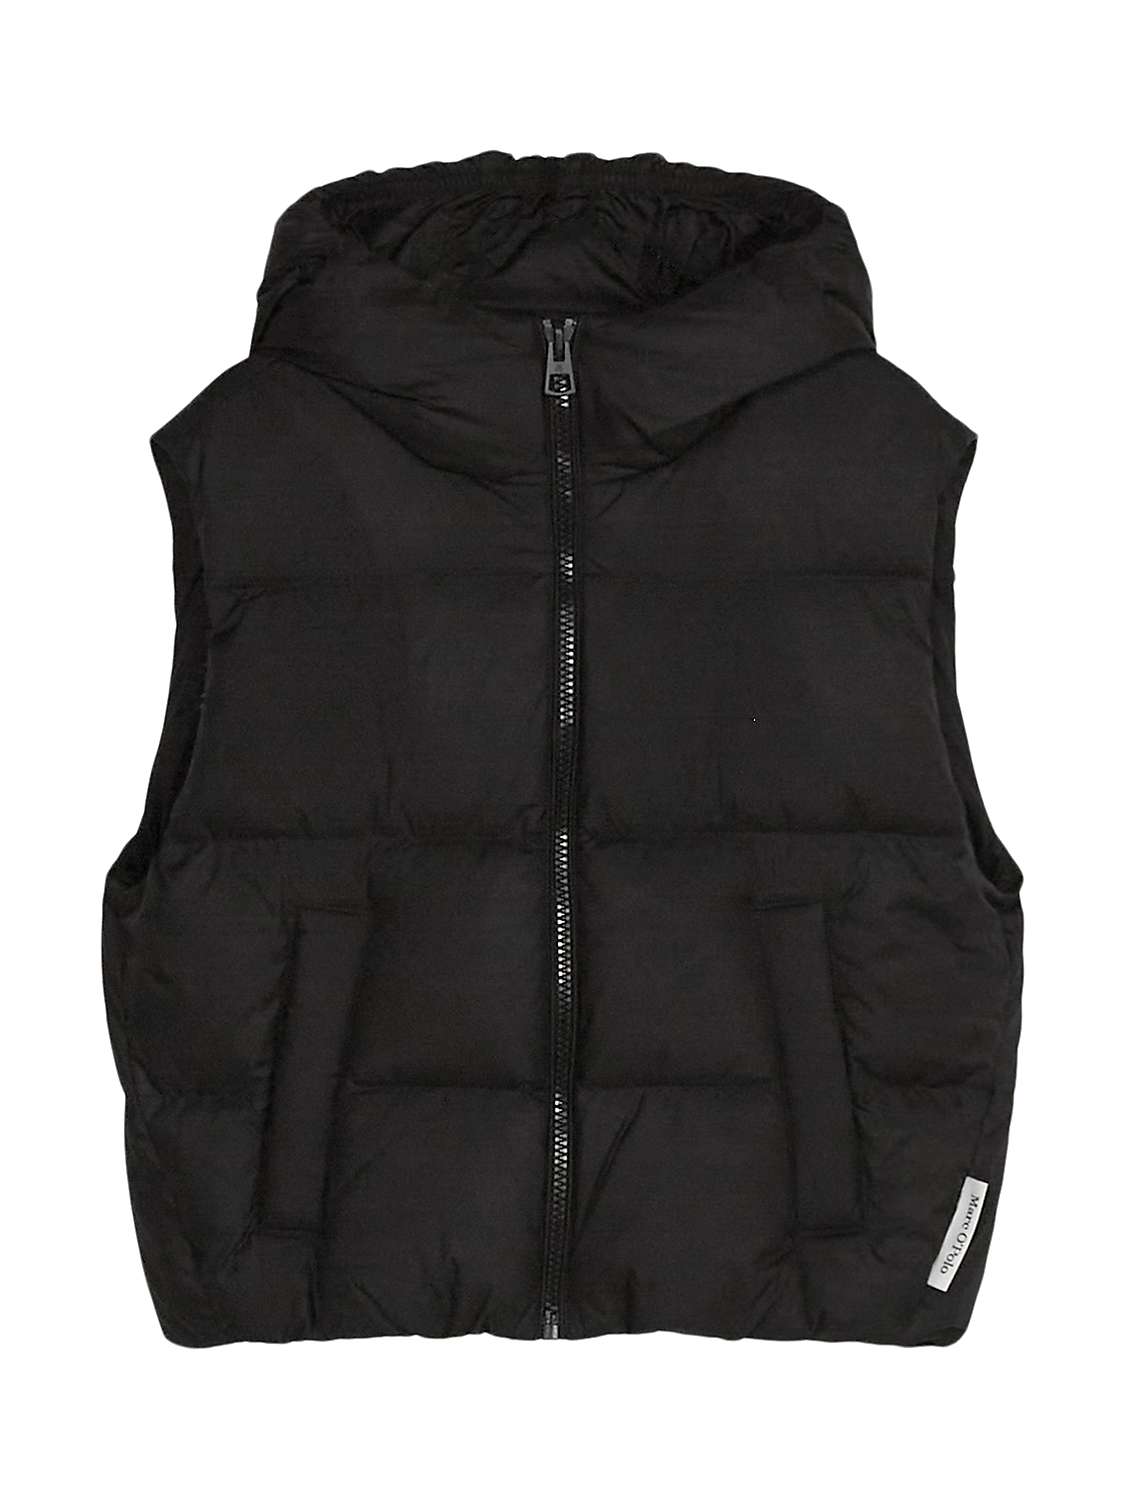 Buy Marc O'Polo Woven Hooded Gilet, Black Online at johnlewis.com